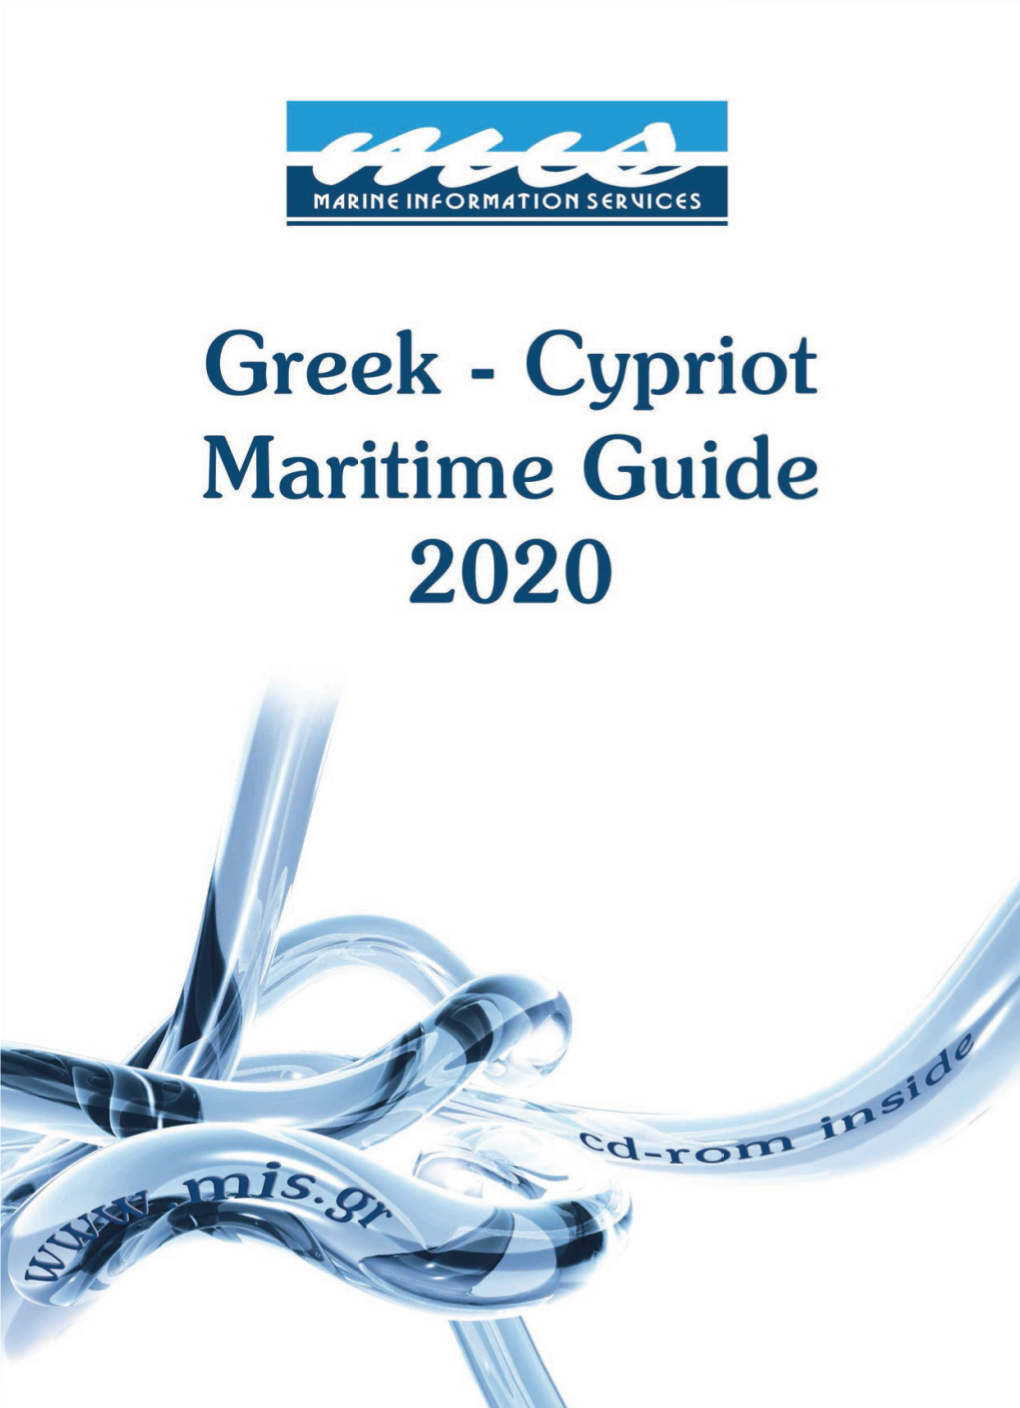 Greek Cypriot Maritime Guide Sample Pages